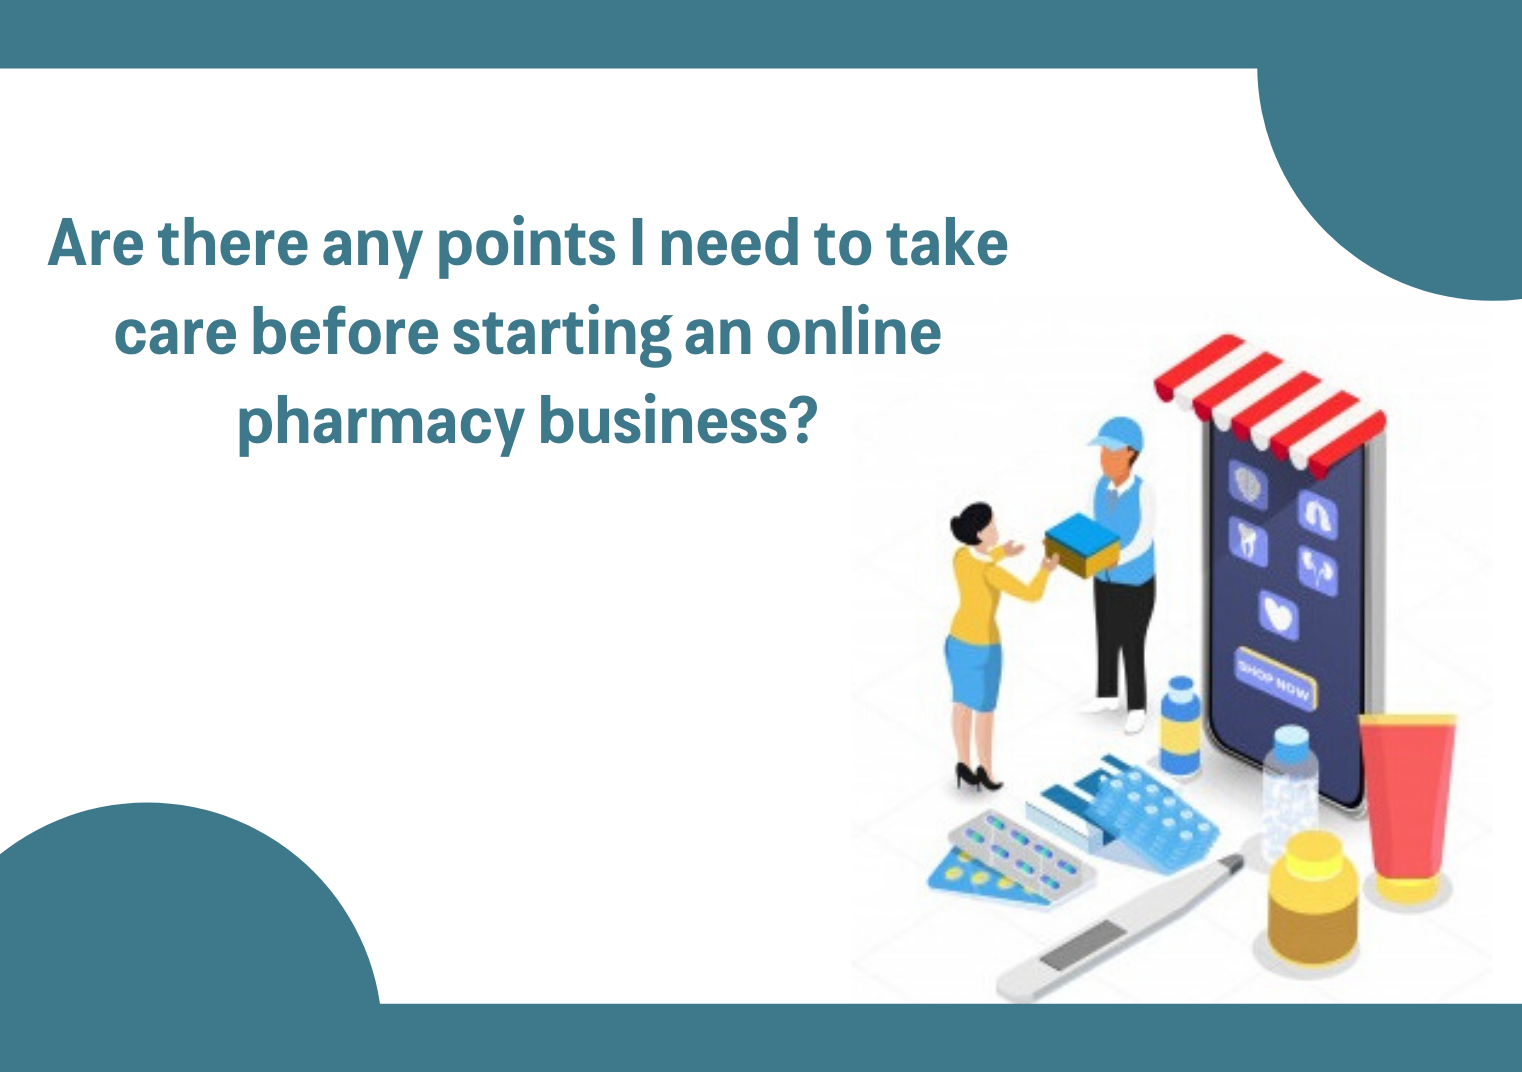 Are there any points I need to take care before starting an online pharmacy business?